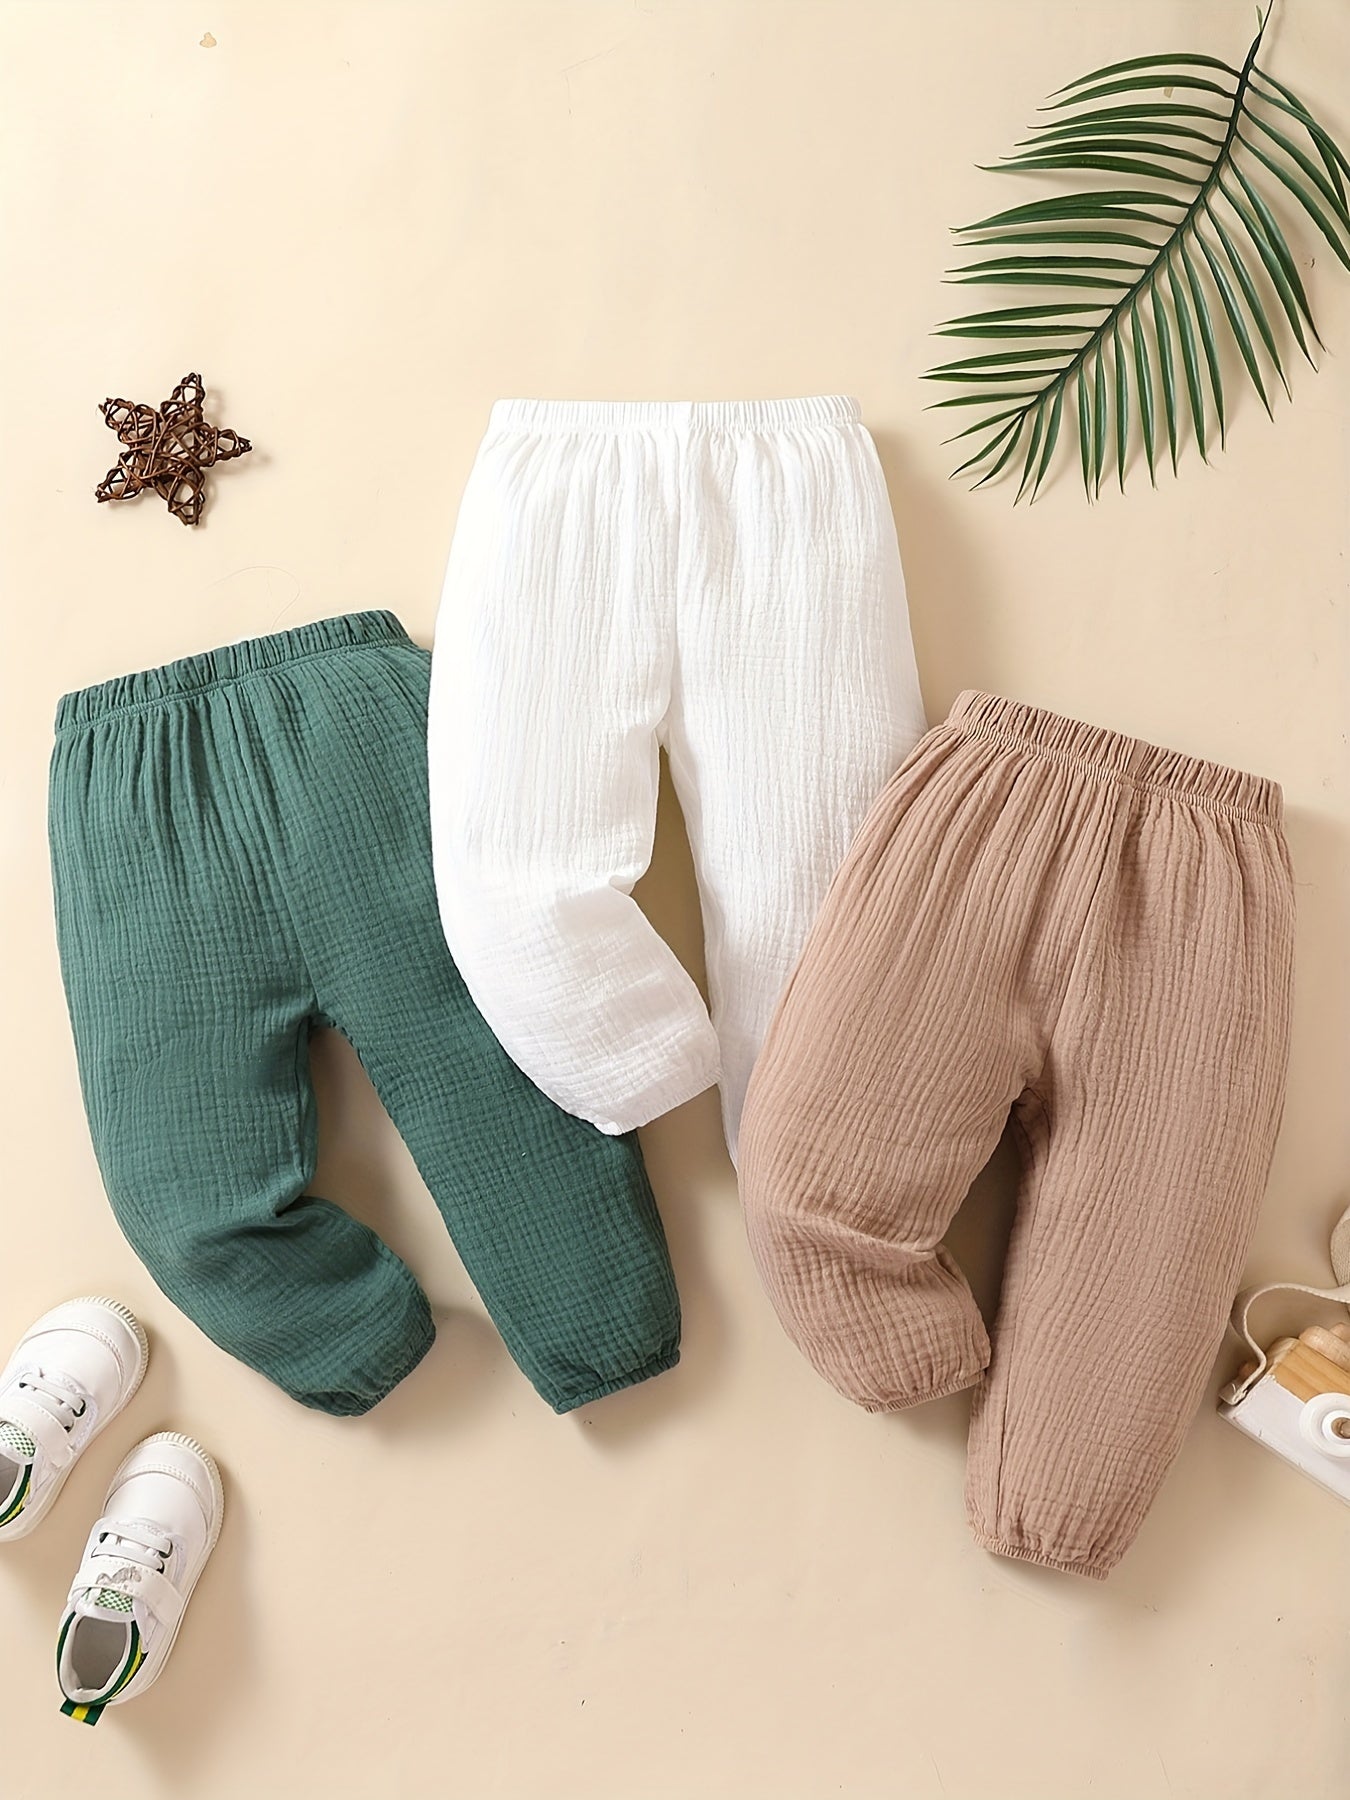 3pcs Super Soft Comfy 100% Cotton Muslin Pants Set - Elastic Waist, Breathable, Gentle on Skin, Casual Wear for Baby Boys and Girls - Perfect for All Seasons - Ammpoure Wellbeing